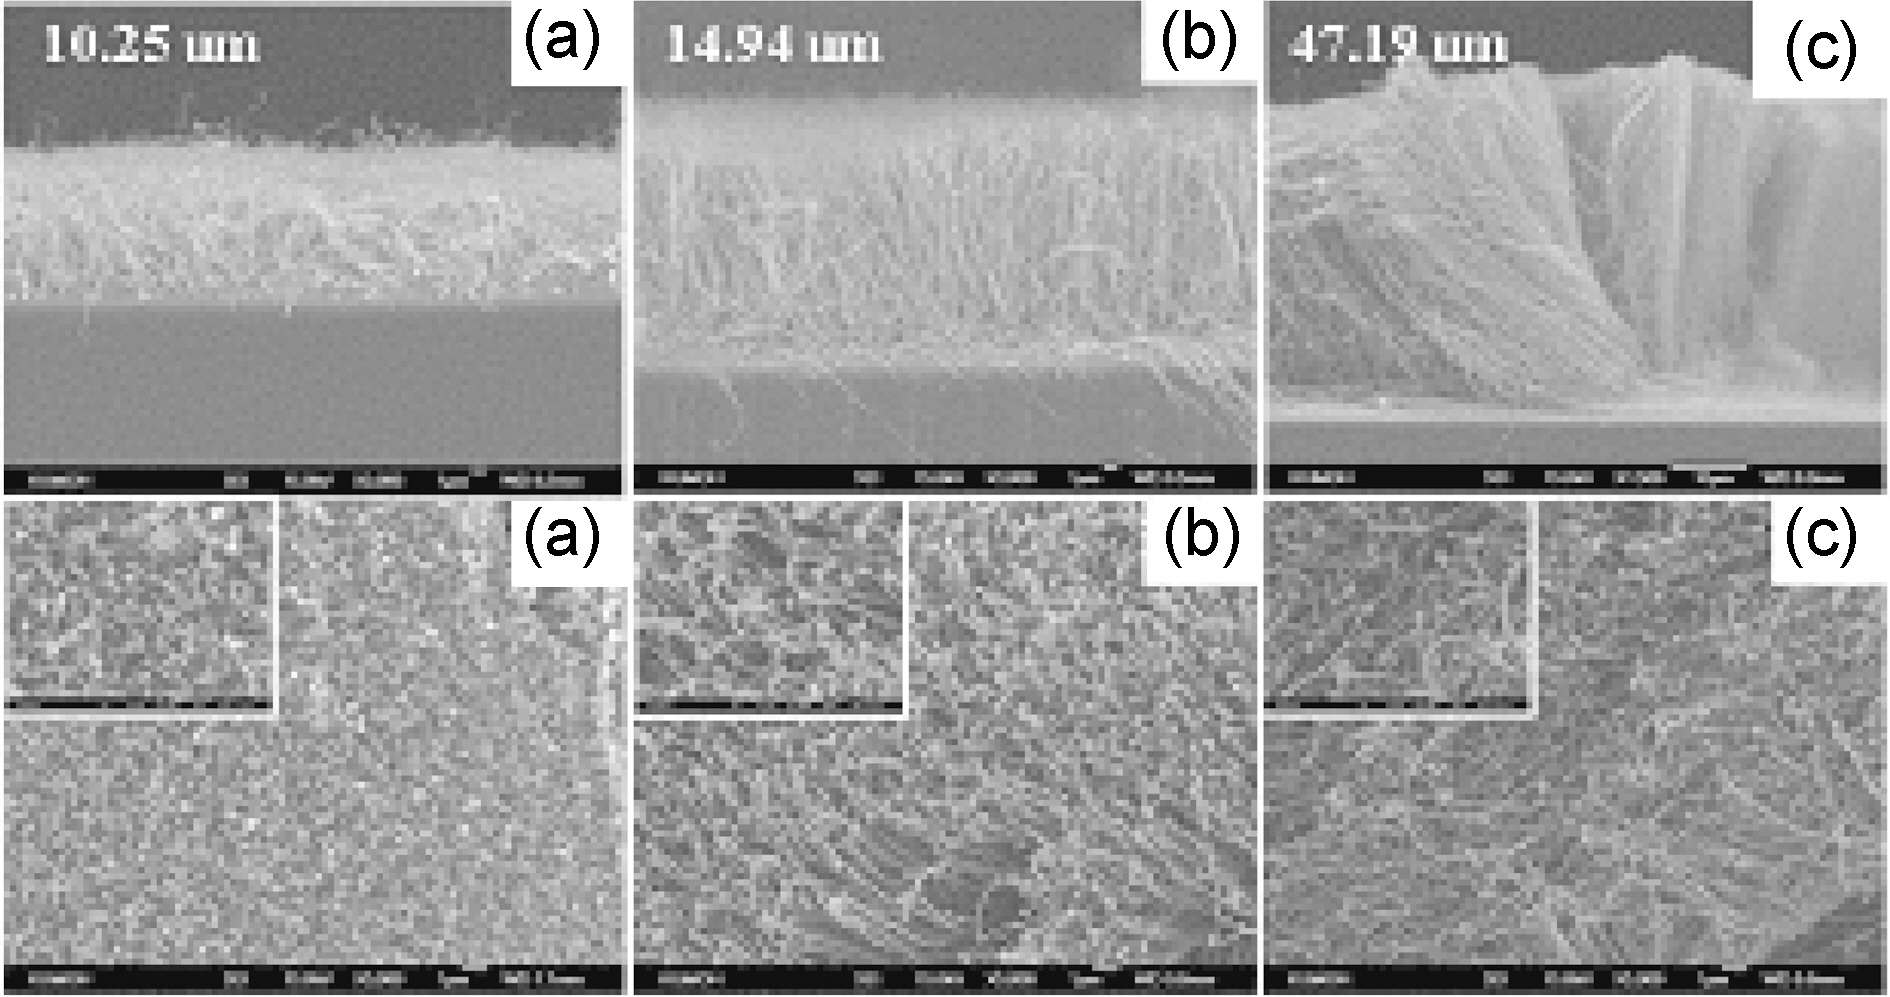 FE-SEM images of carbon nanotubes grown on 20 nm Ni catalyst at 300℃ for 10 min with an applied voltage of (a) 100 V (b) 125 V and (c) 150 V.